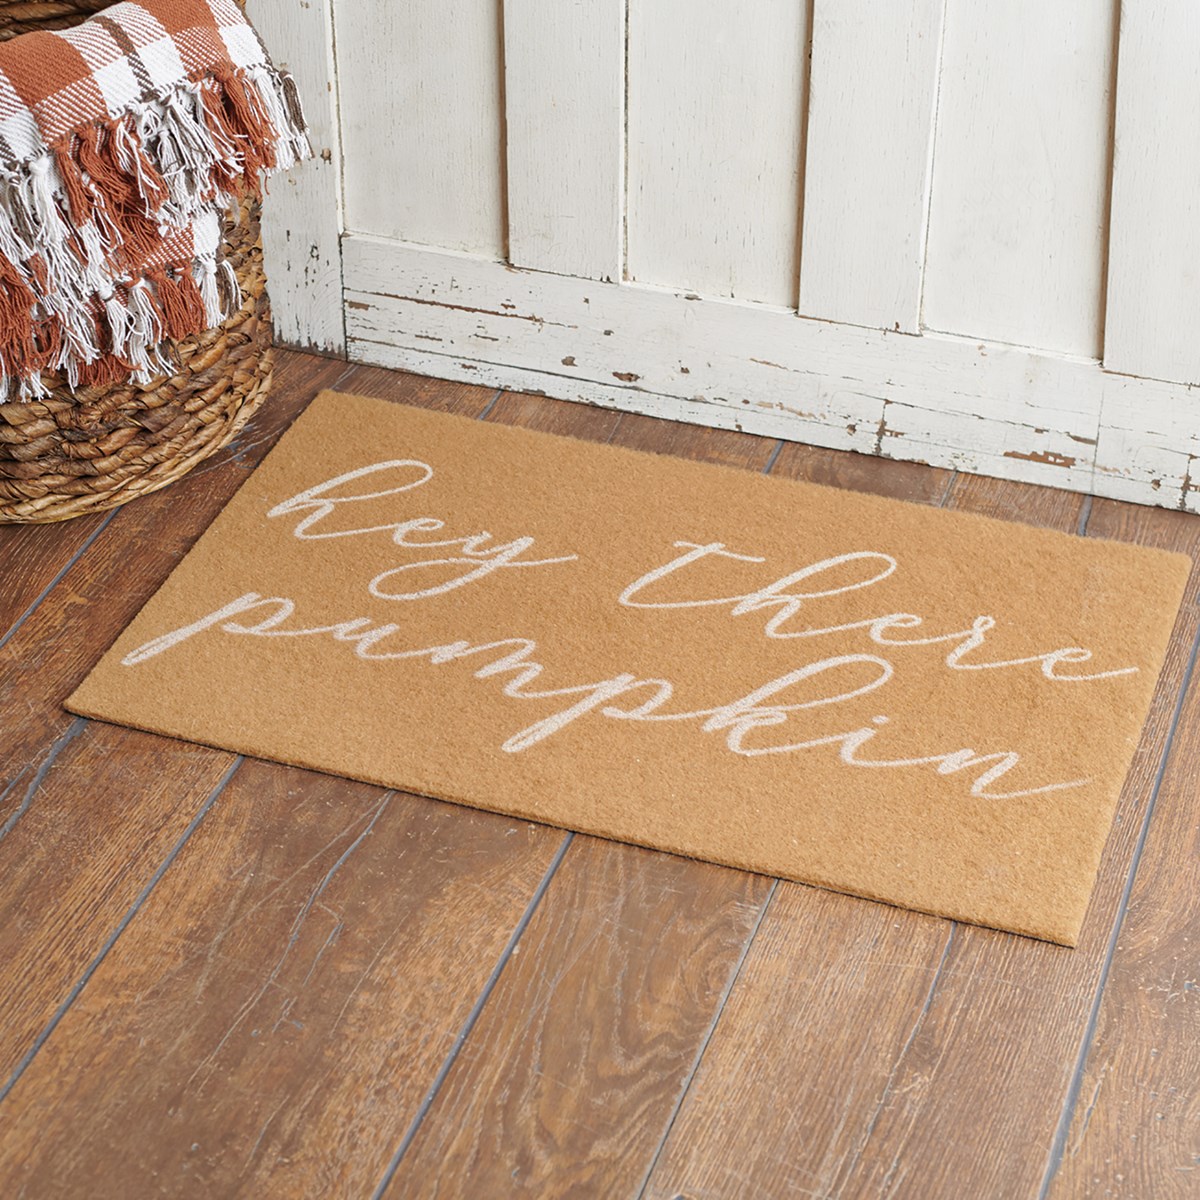 Hey There Pumpkin Rug - Polyester, PVC skid-resistant backing